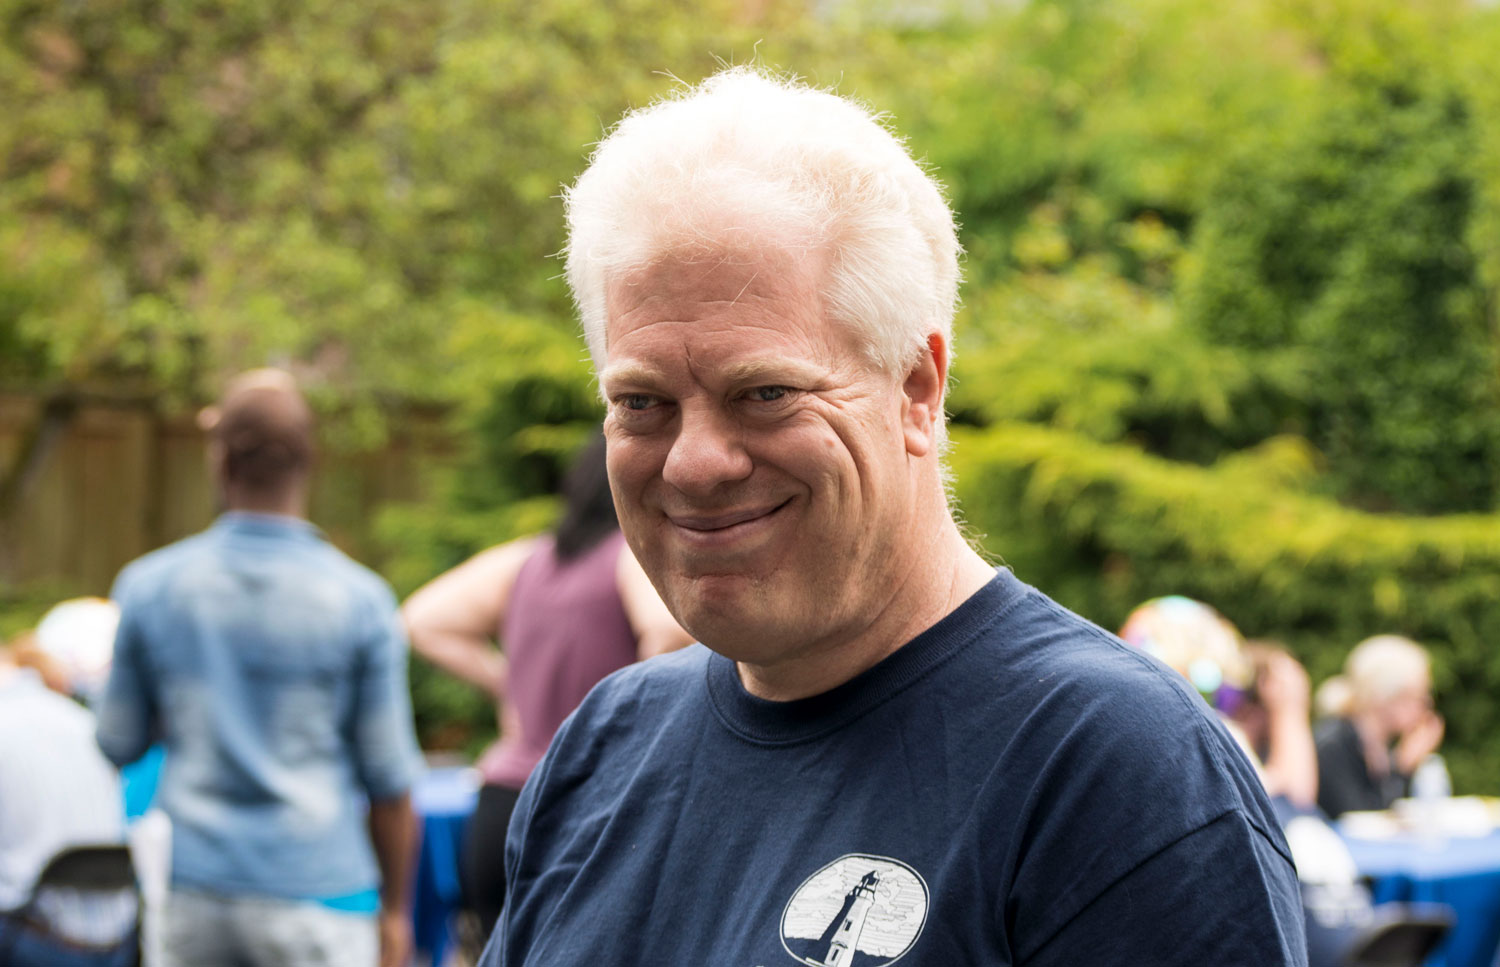 Portrait of Mike Scheschy, a light skinned man with white hair standing outside and smiling.